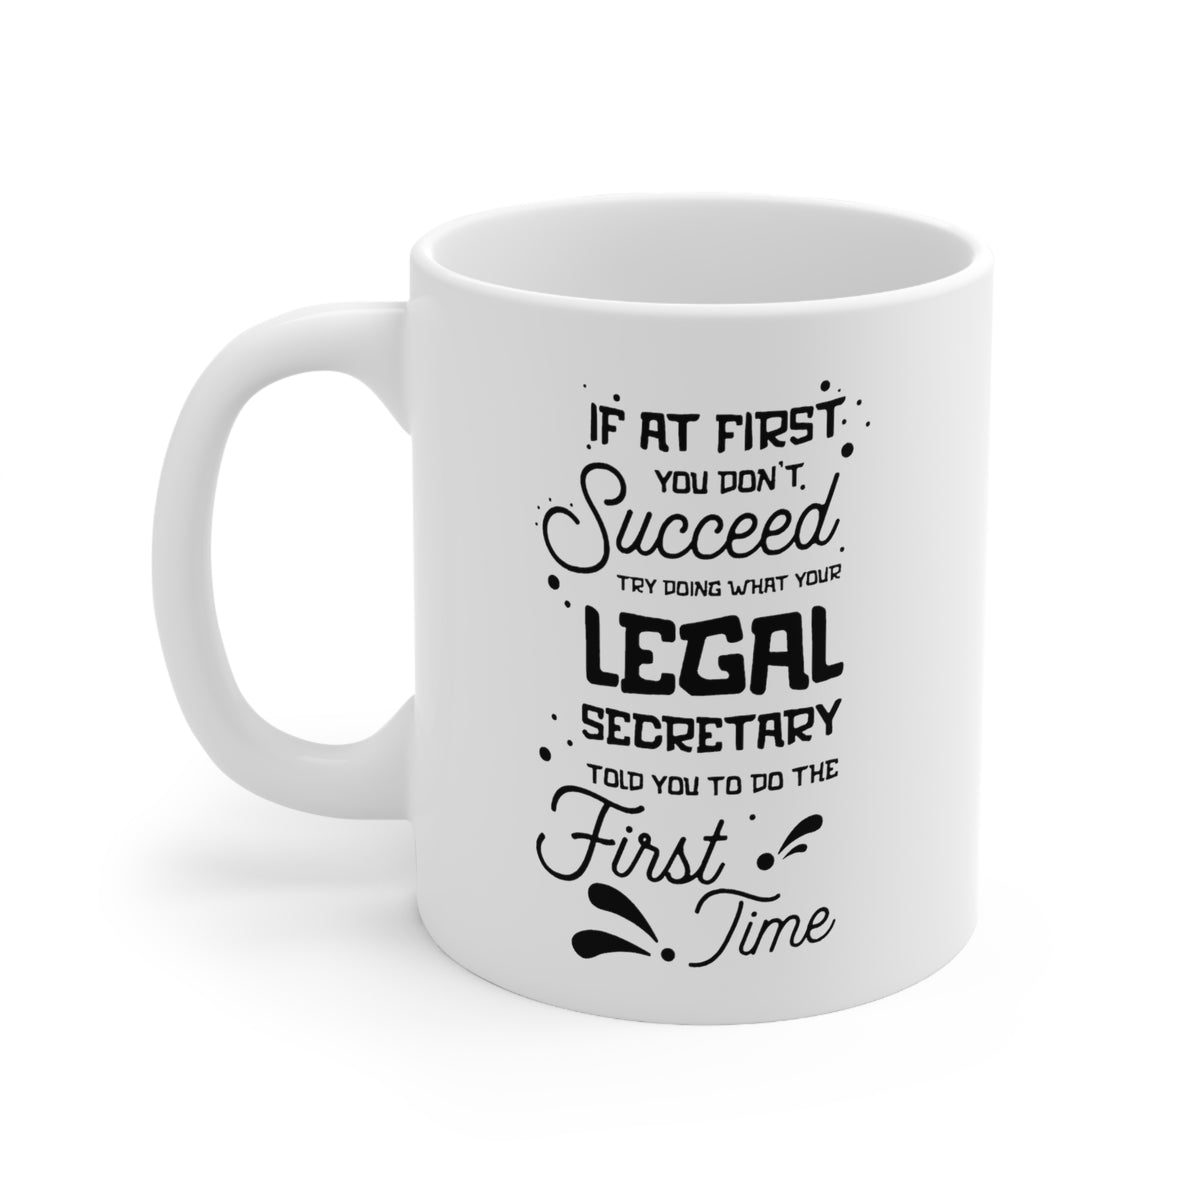 Legal secretary Coffee Mug - Doing What Your Legal secretary Told You - Funny Sarcasm Gifts for Men and Women